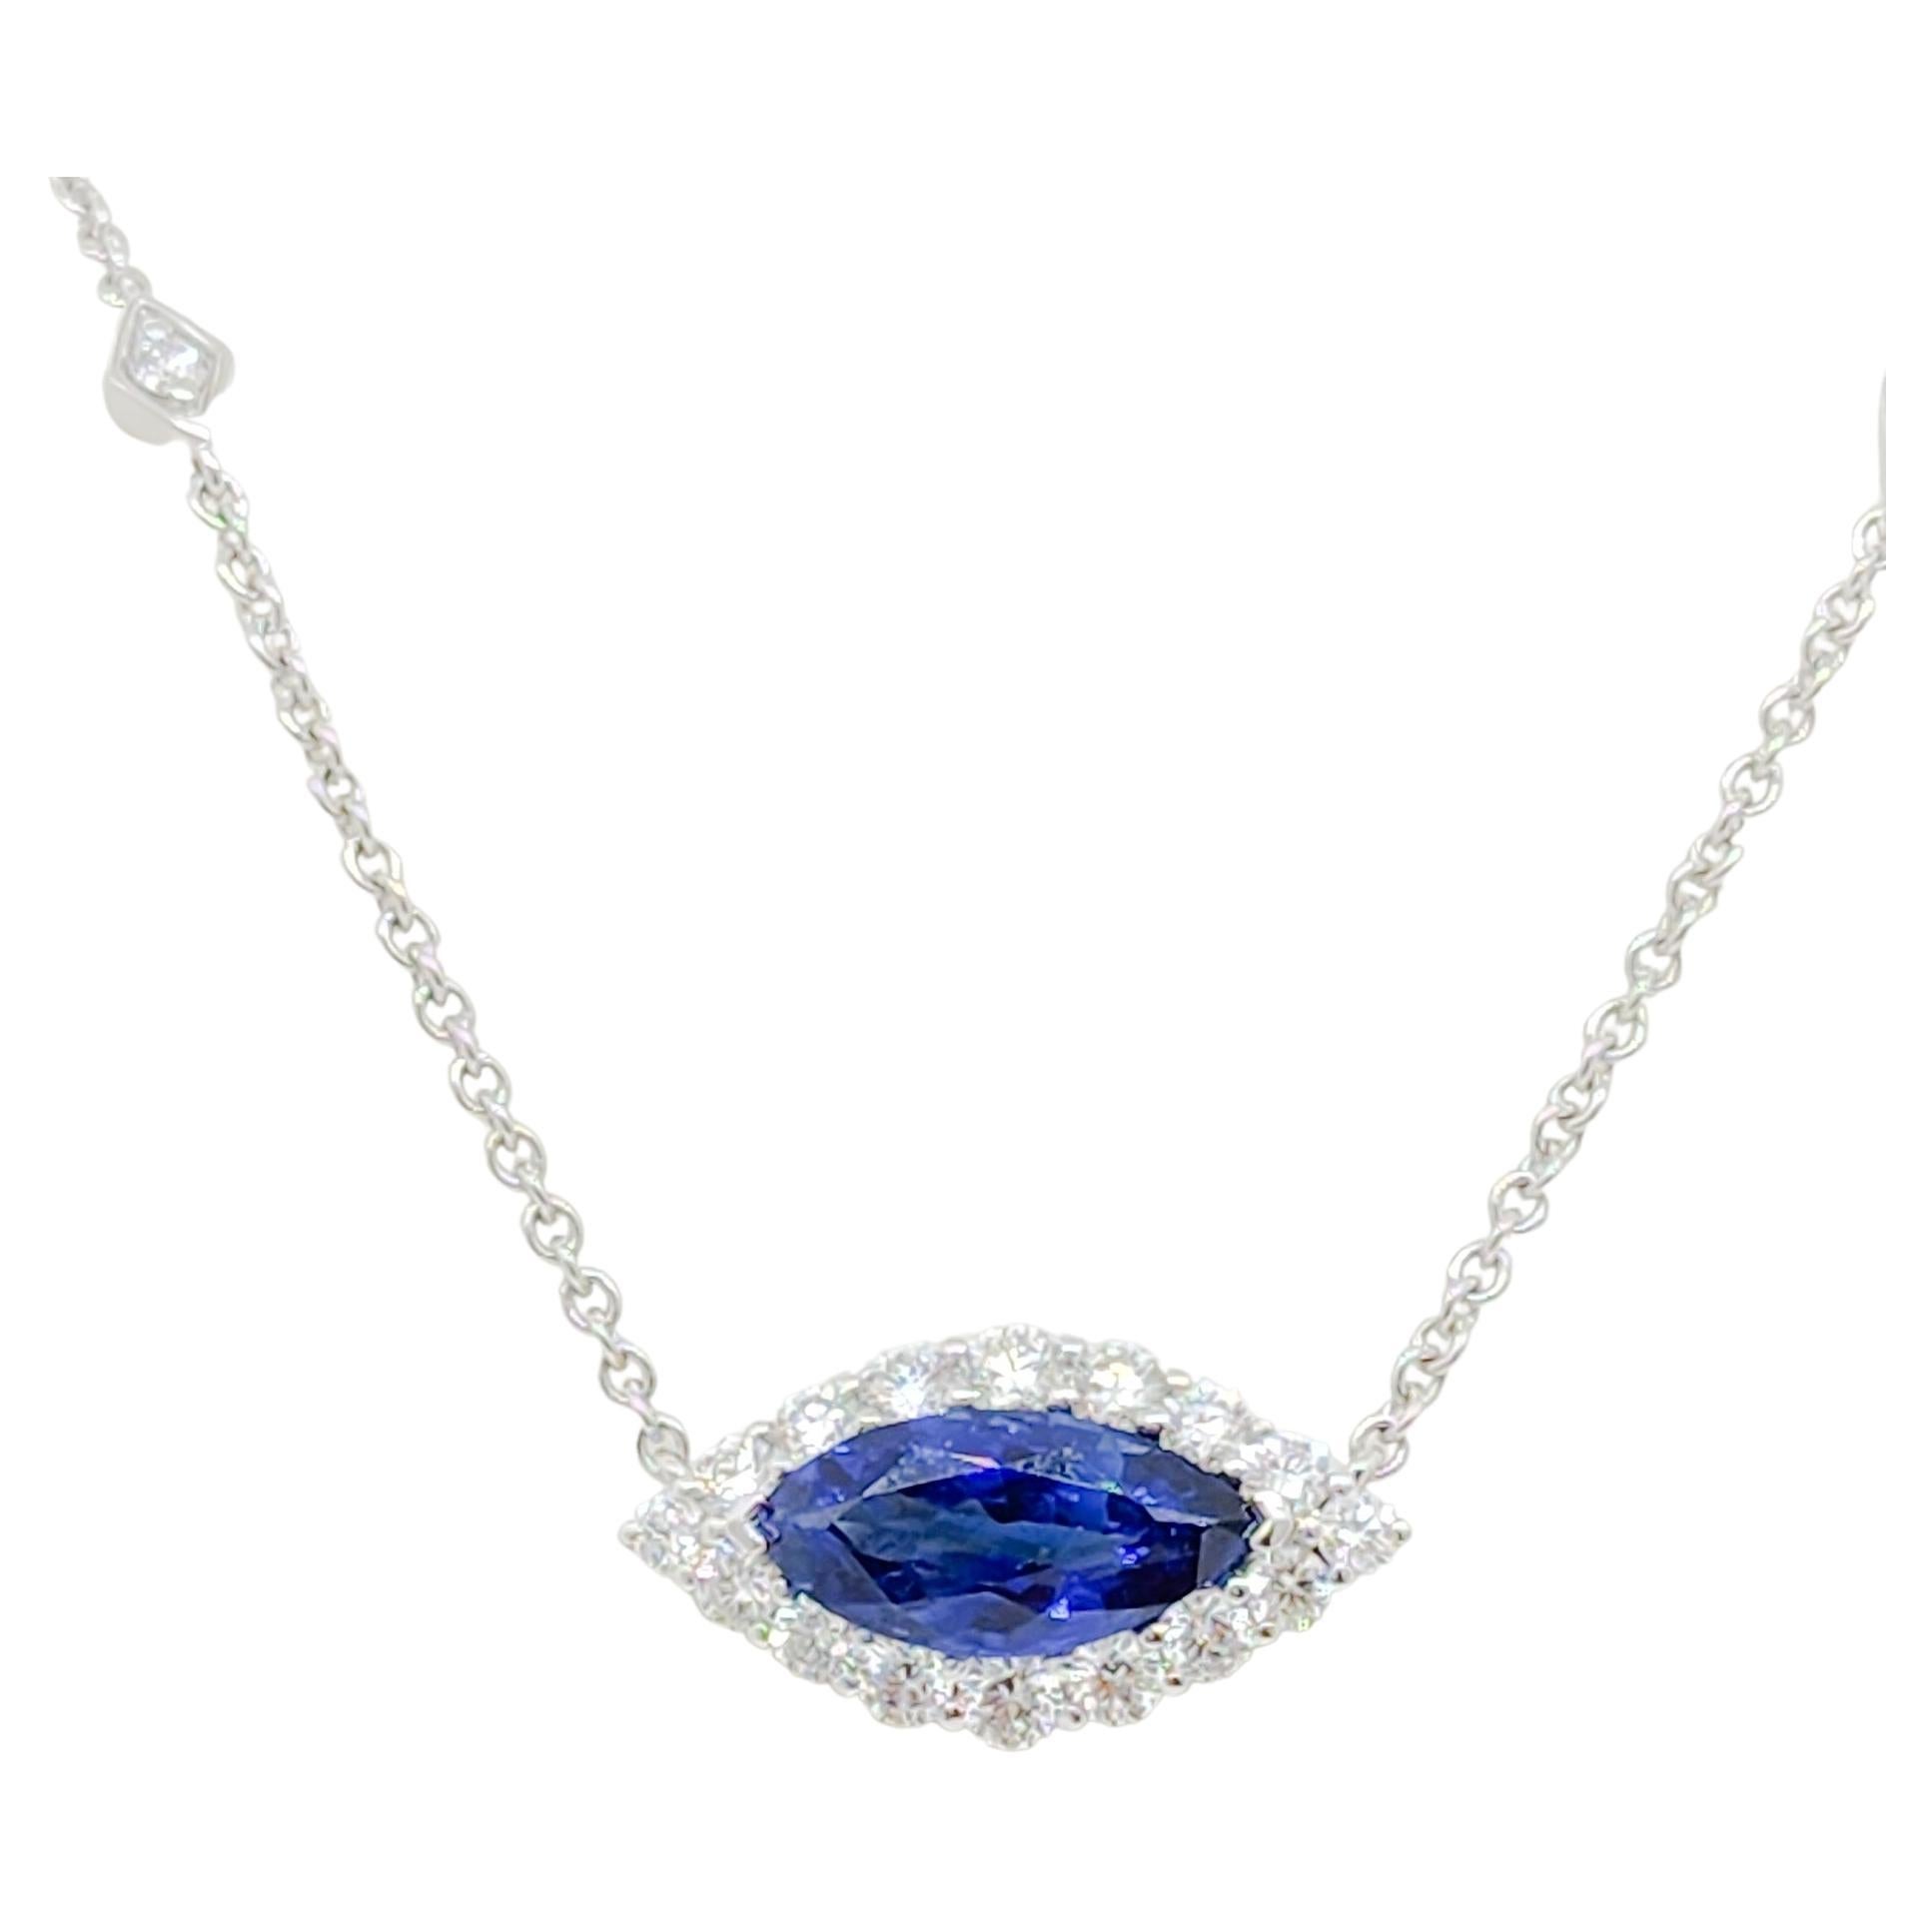 Blue Sapphire and Diamond Pendant Necklace in 18k White Gold